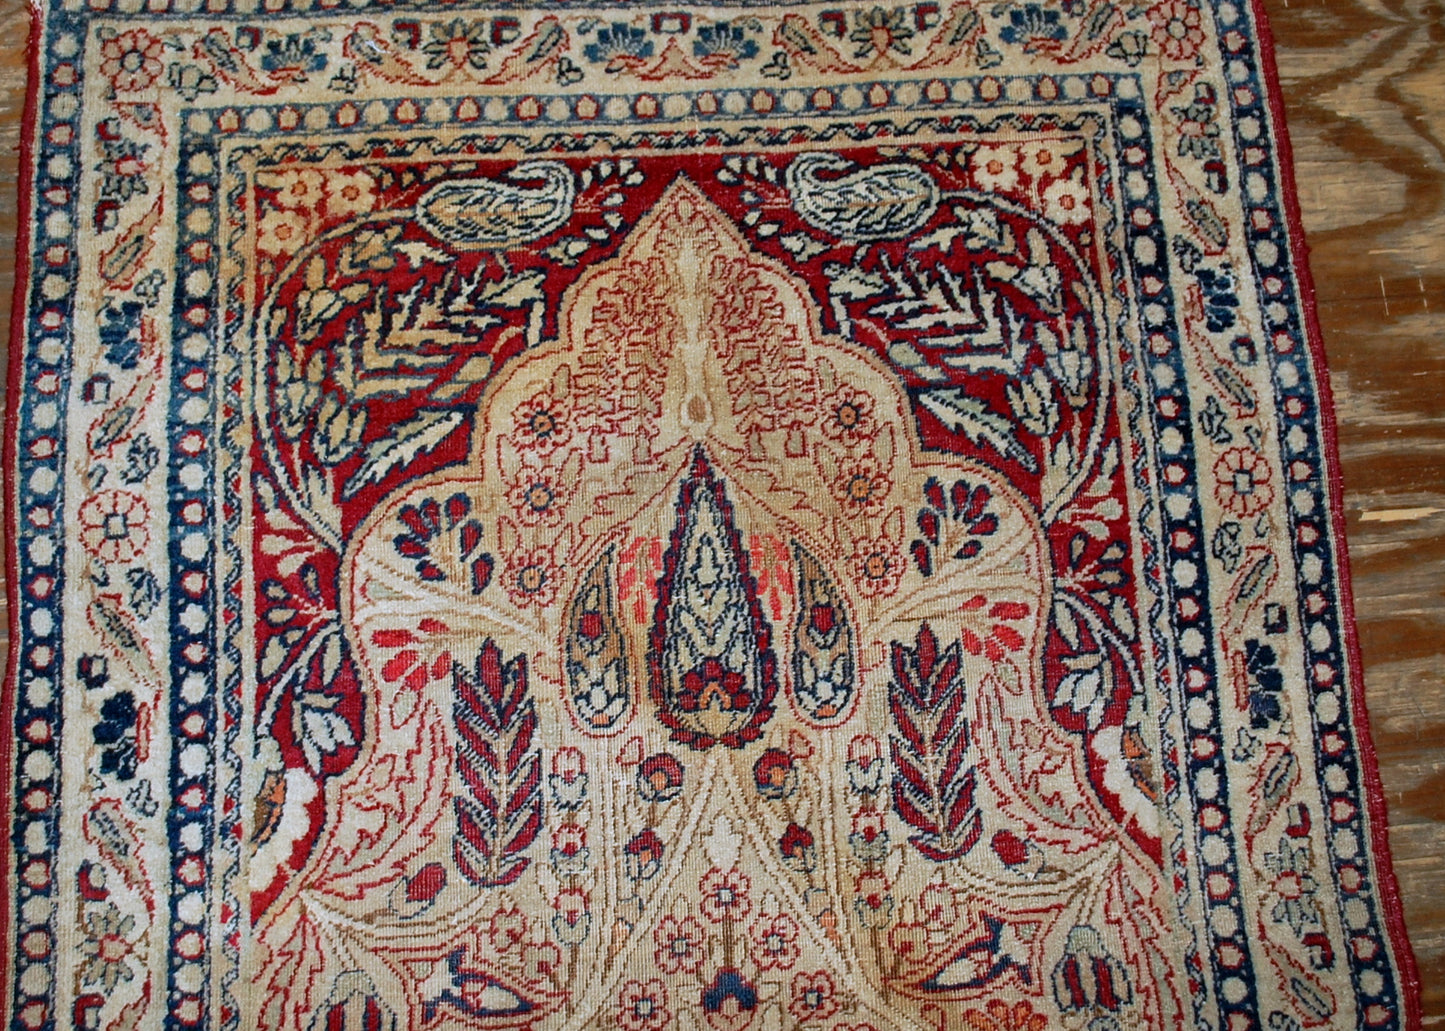 Persian Kerman Lavar rug in original condition, it has some low pile. The rug is prayer in beige and burgundy shades, made in the end of 19th century.